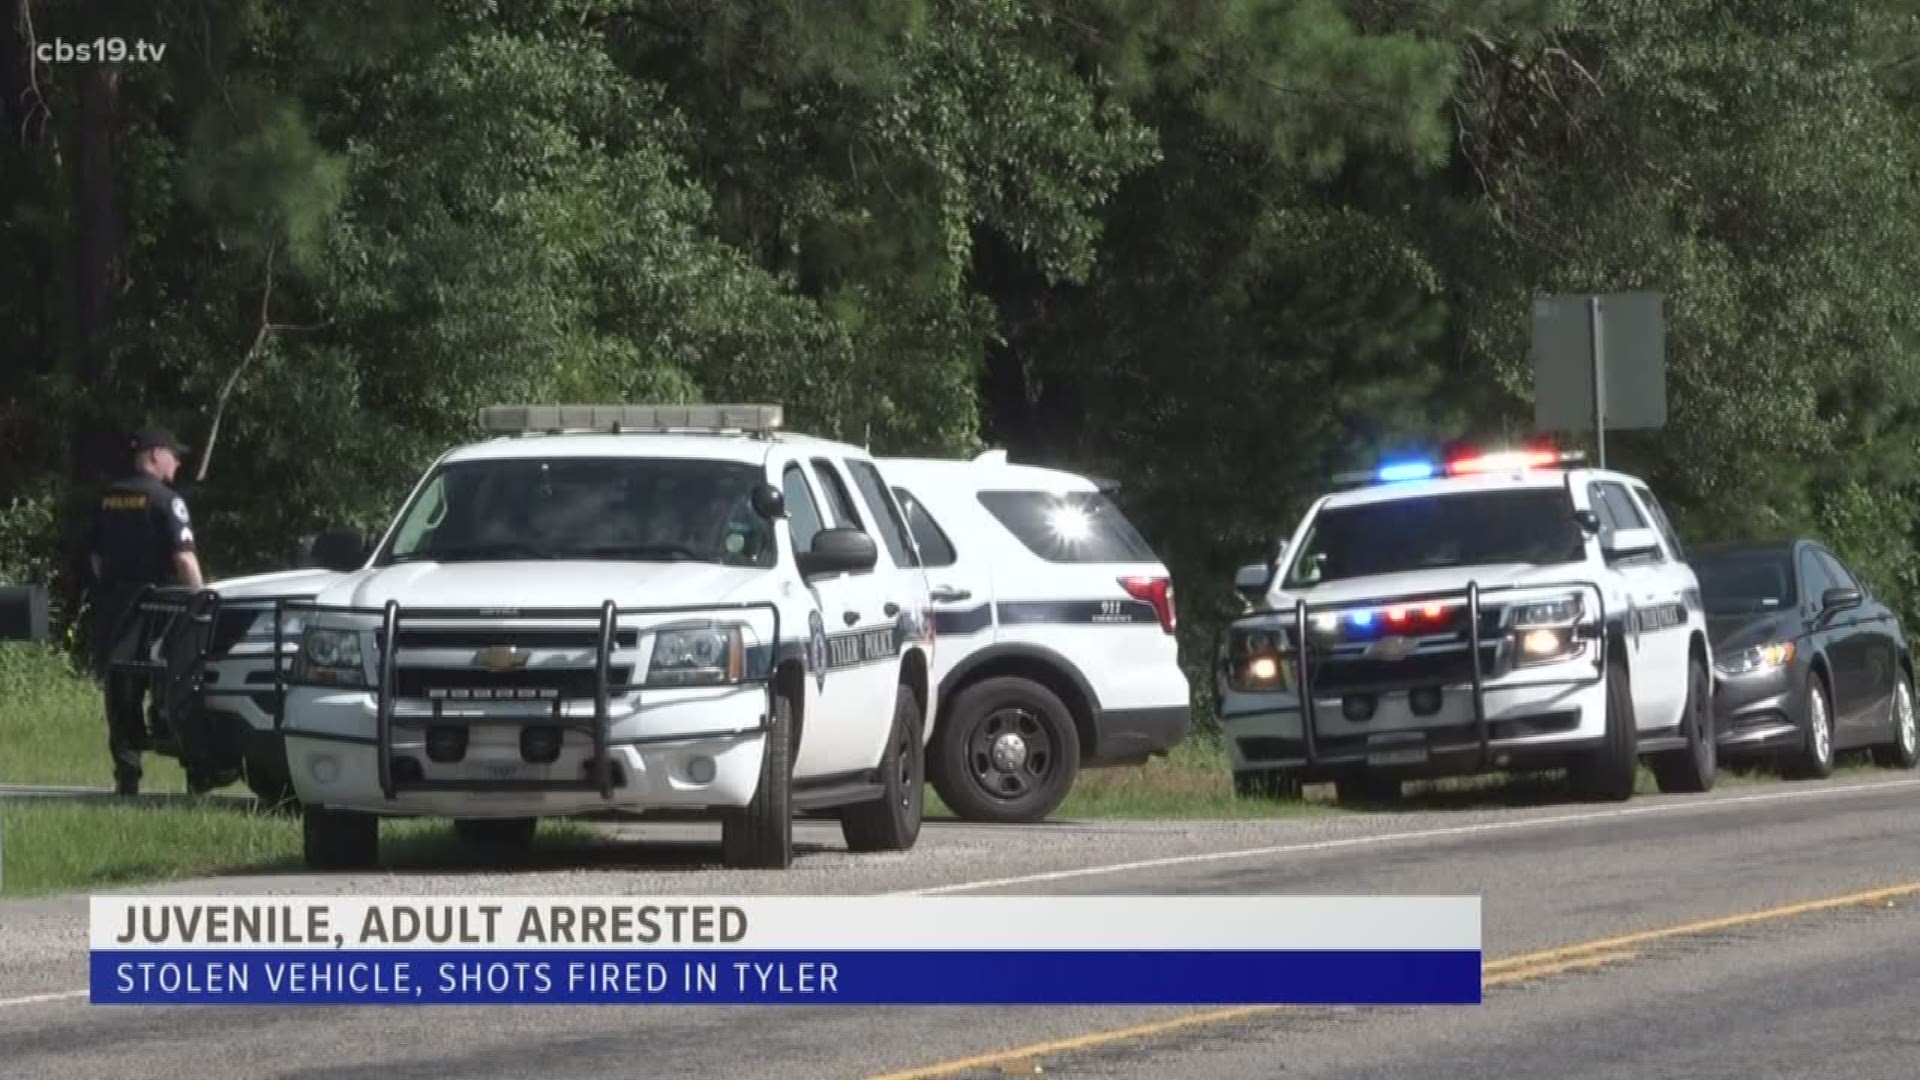 Tyler police said the suspects fired at the vehicle's owner before abandoning it.